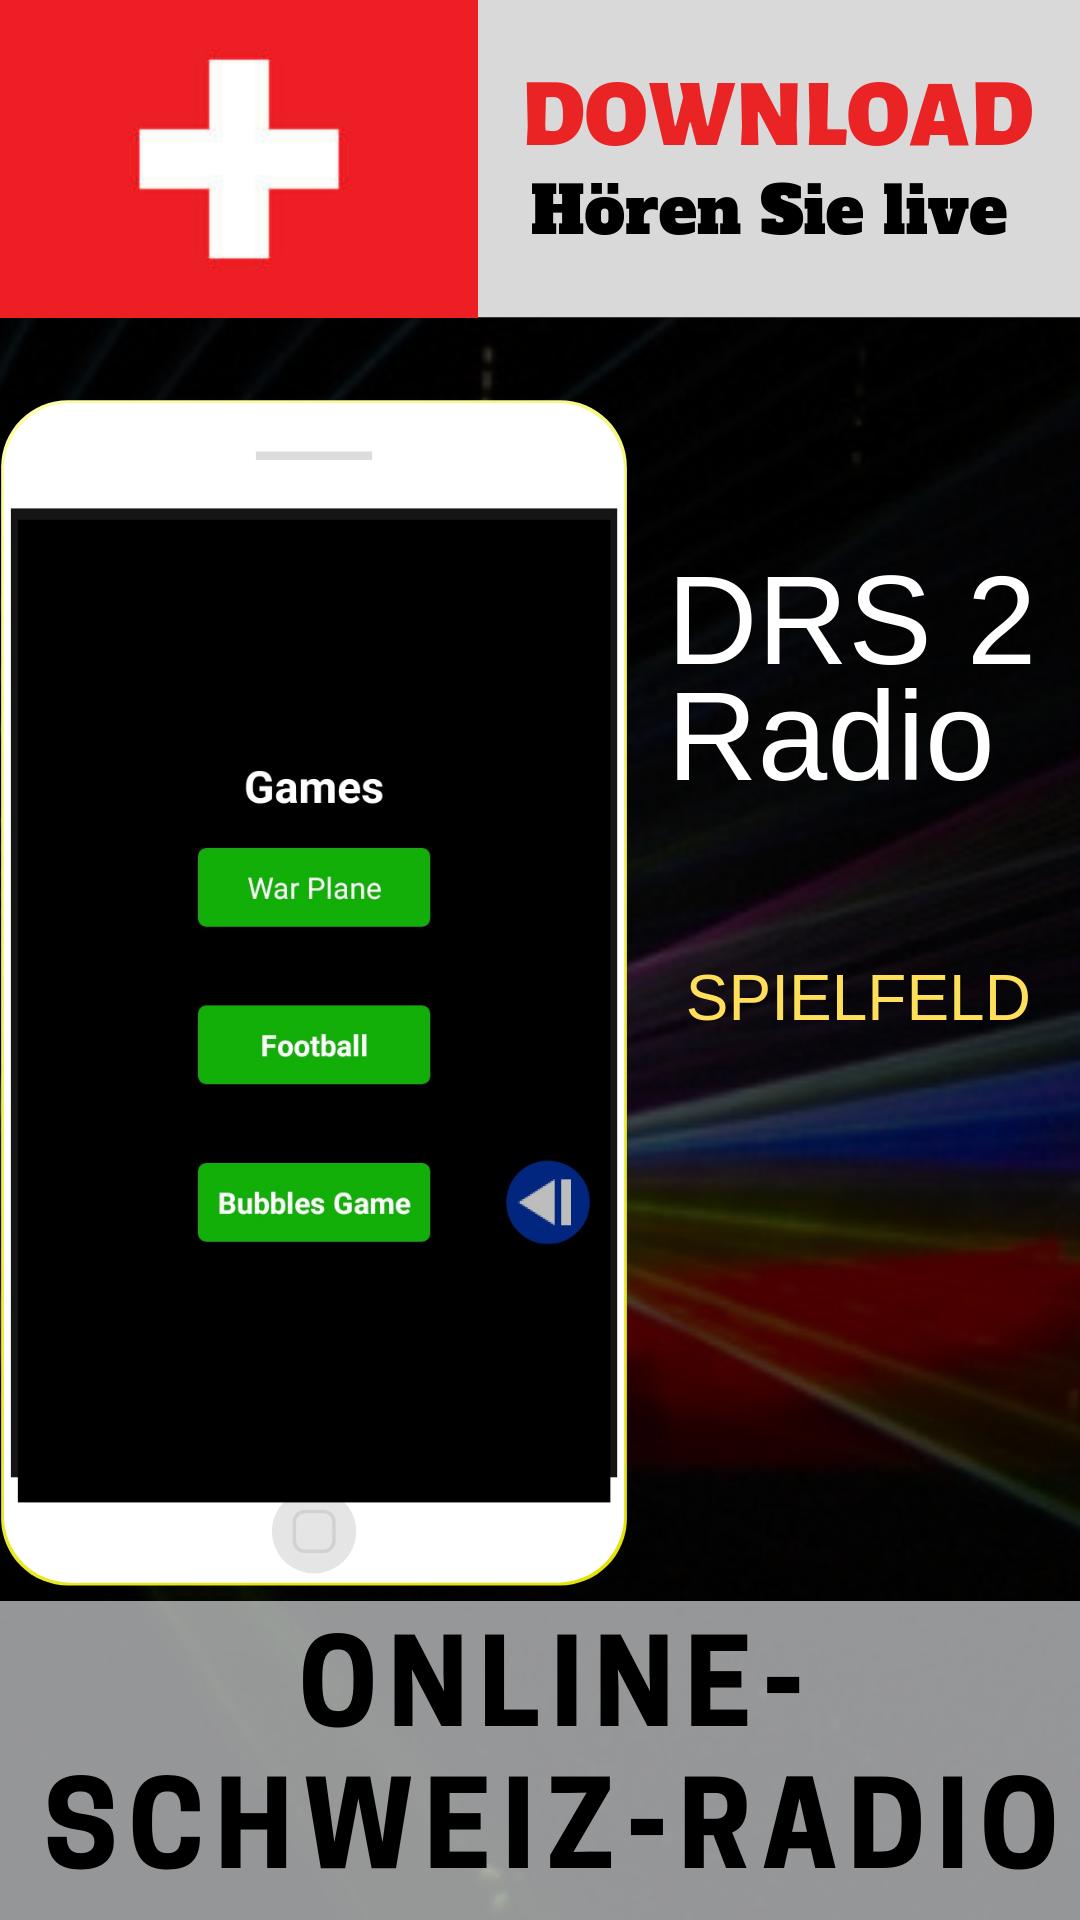 DRS 3 Radio Free Online for Android - APK Download